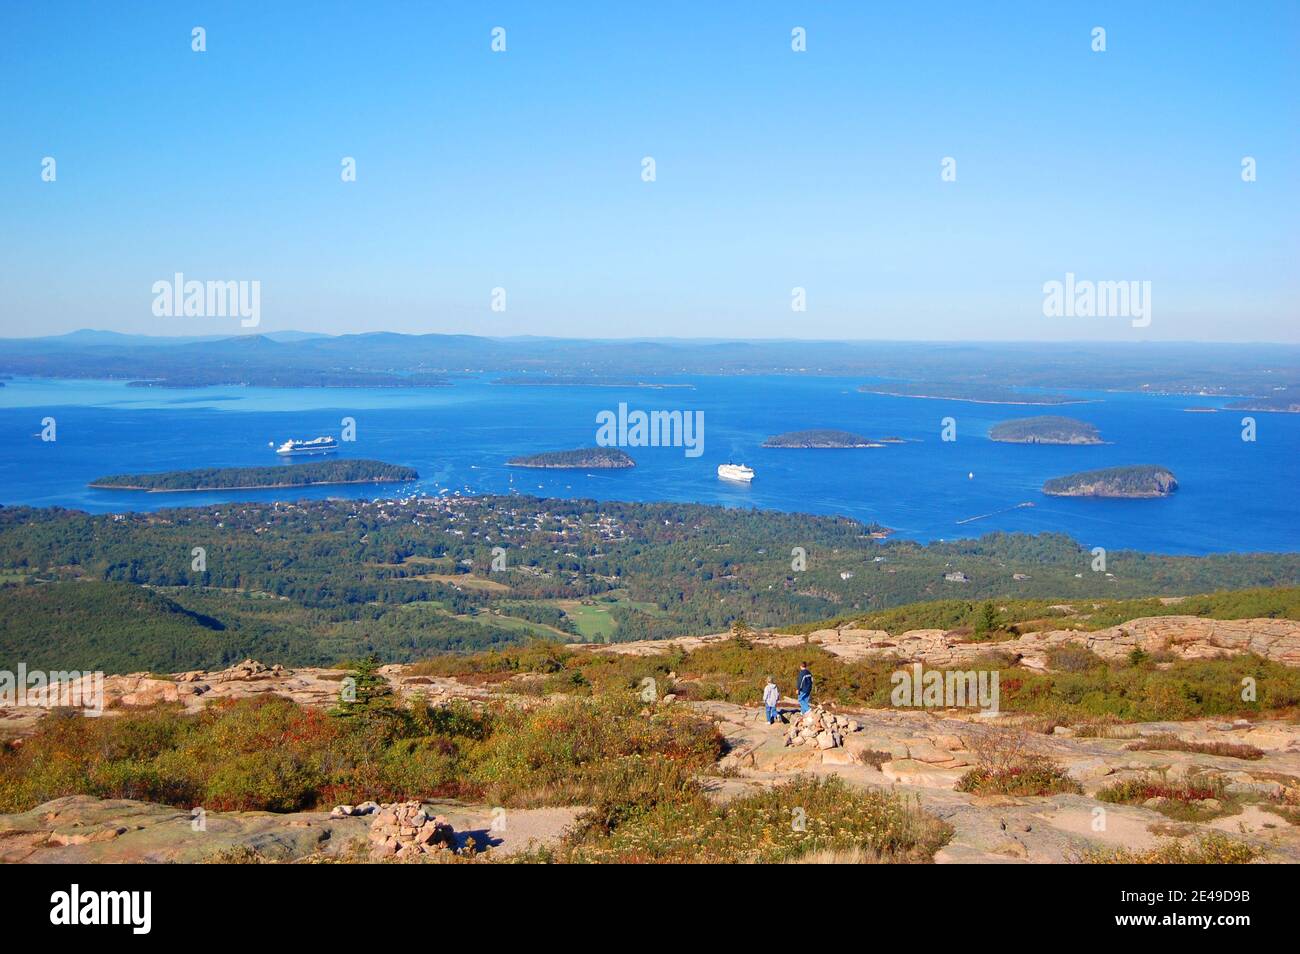 Top of the Cadillac Peak with fall foliage in Acadia National Park, Maine ME, USA. Stock Photo